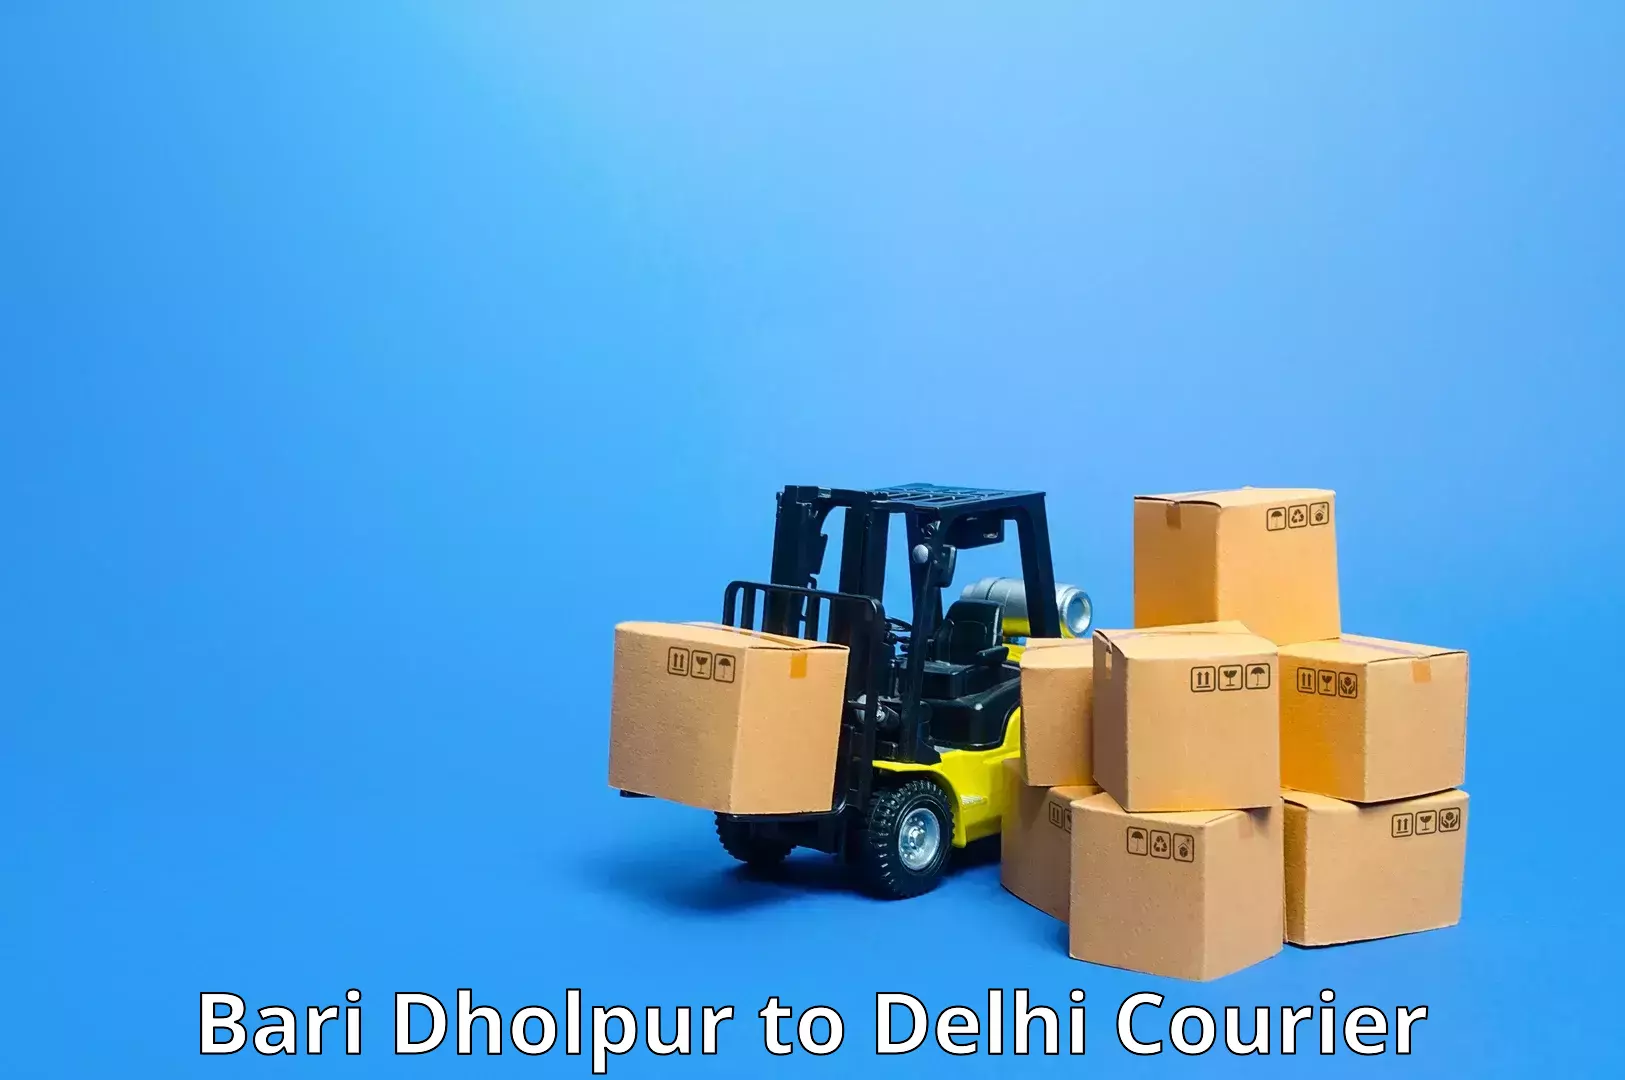 High-speed delivery Bari Dholpur to IIT Delhi